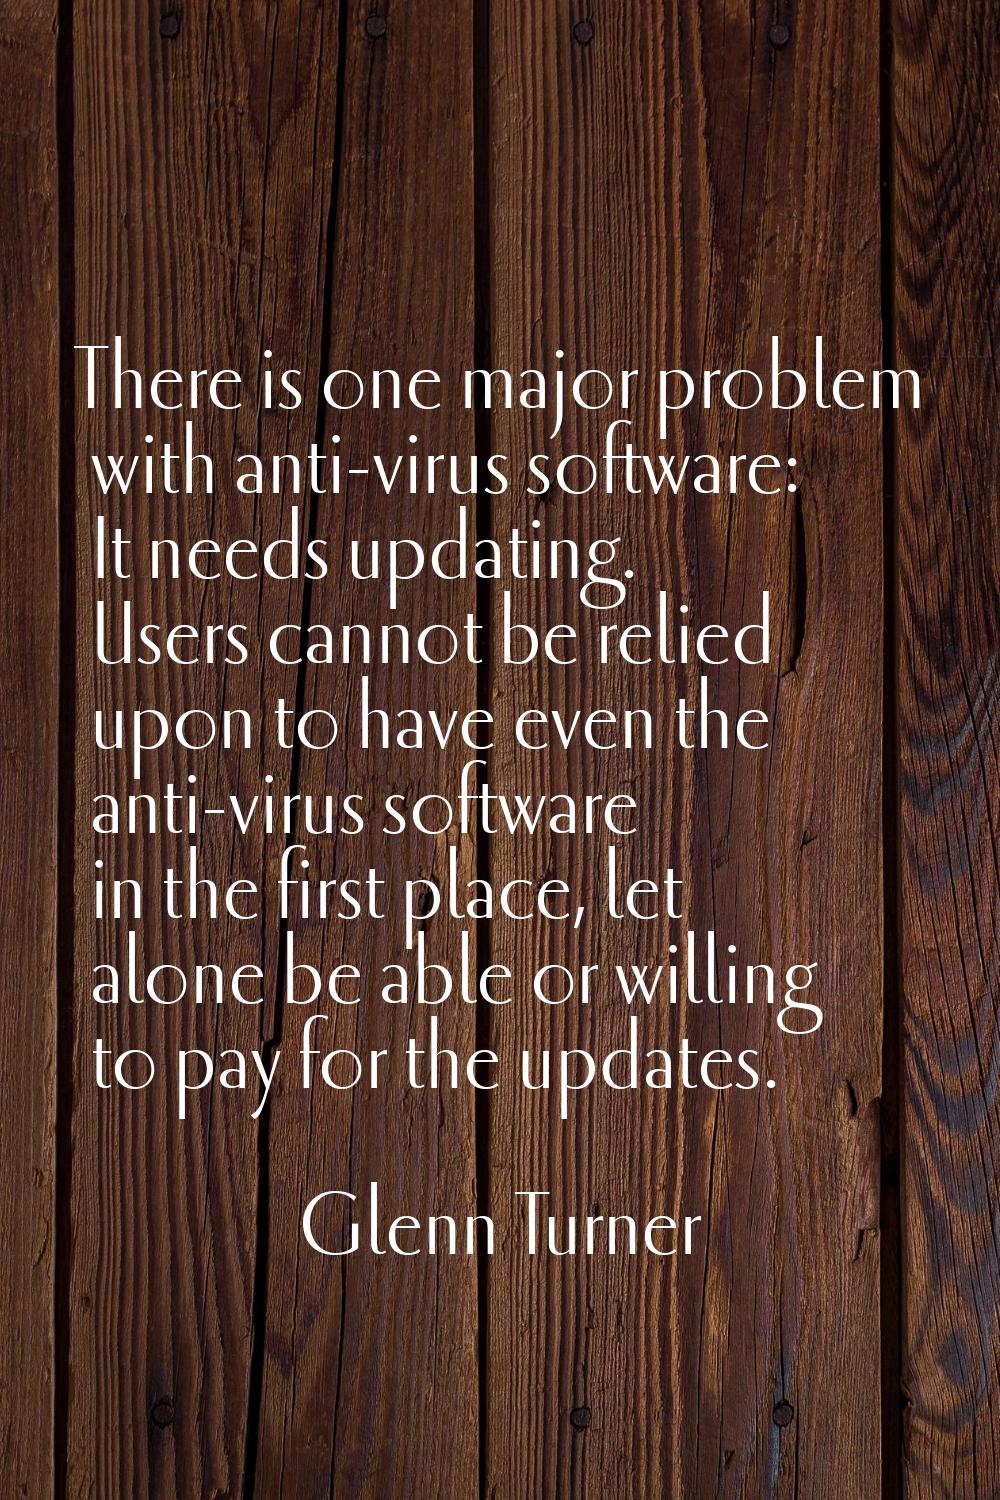 There is one major problem with anti-virus software: It needs updating. Users cannot be relied upon